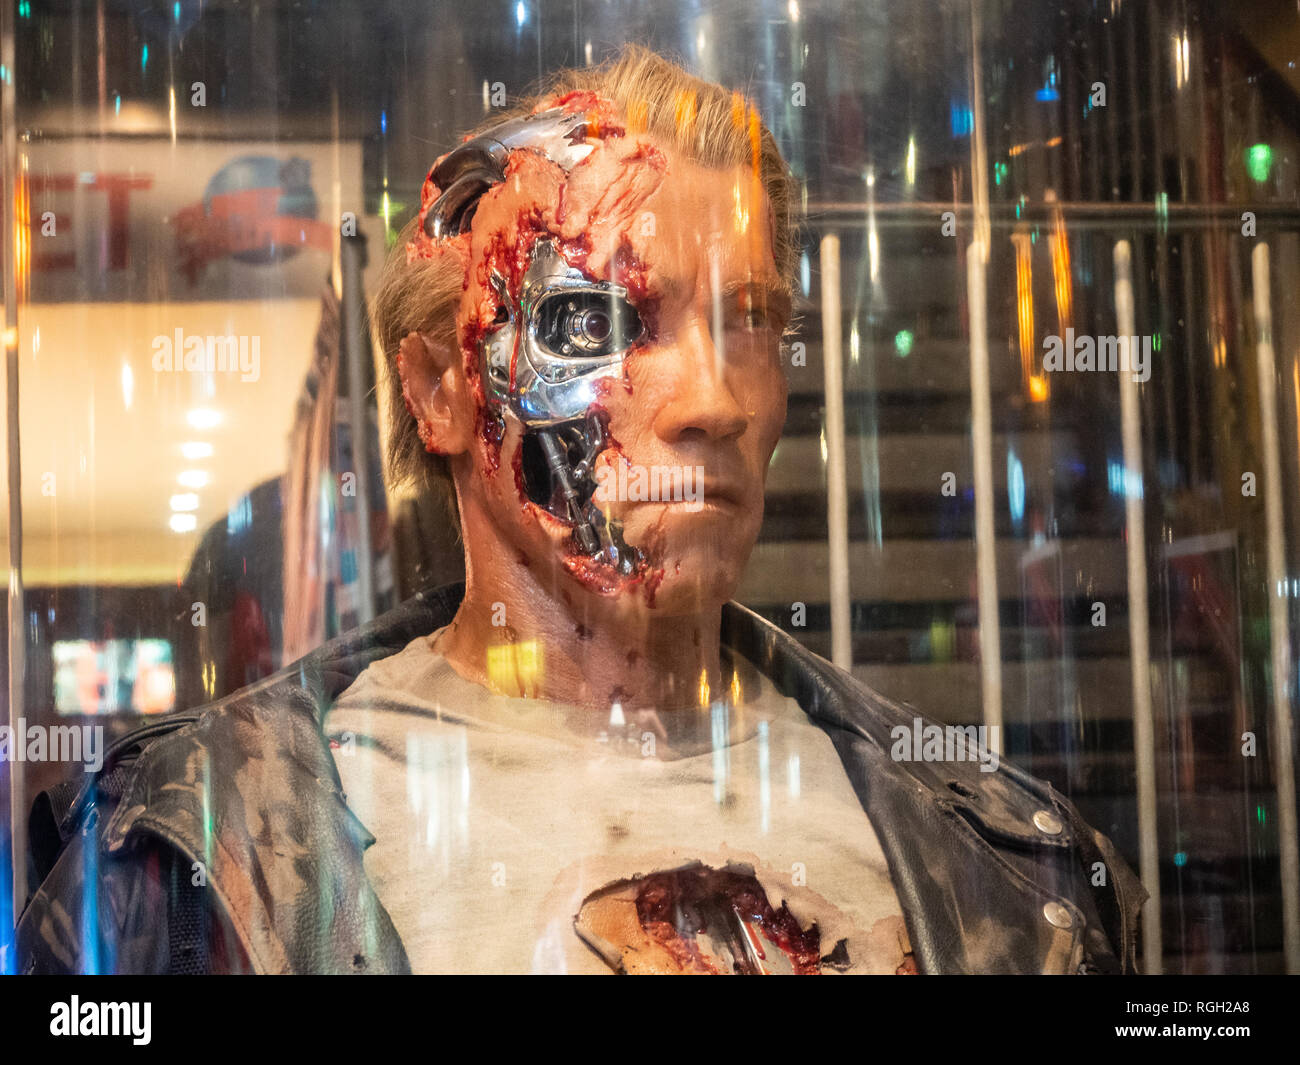 London,UK - January 26th 2019: Planet Hollywood restaurant in London. The famous Terminator figure inside Hollywood themed restaurant chain Stock Photo